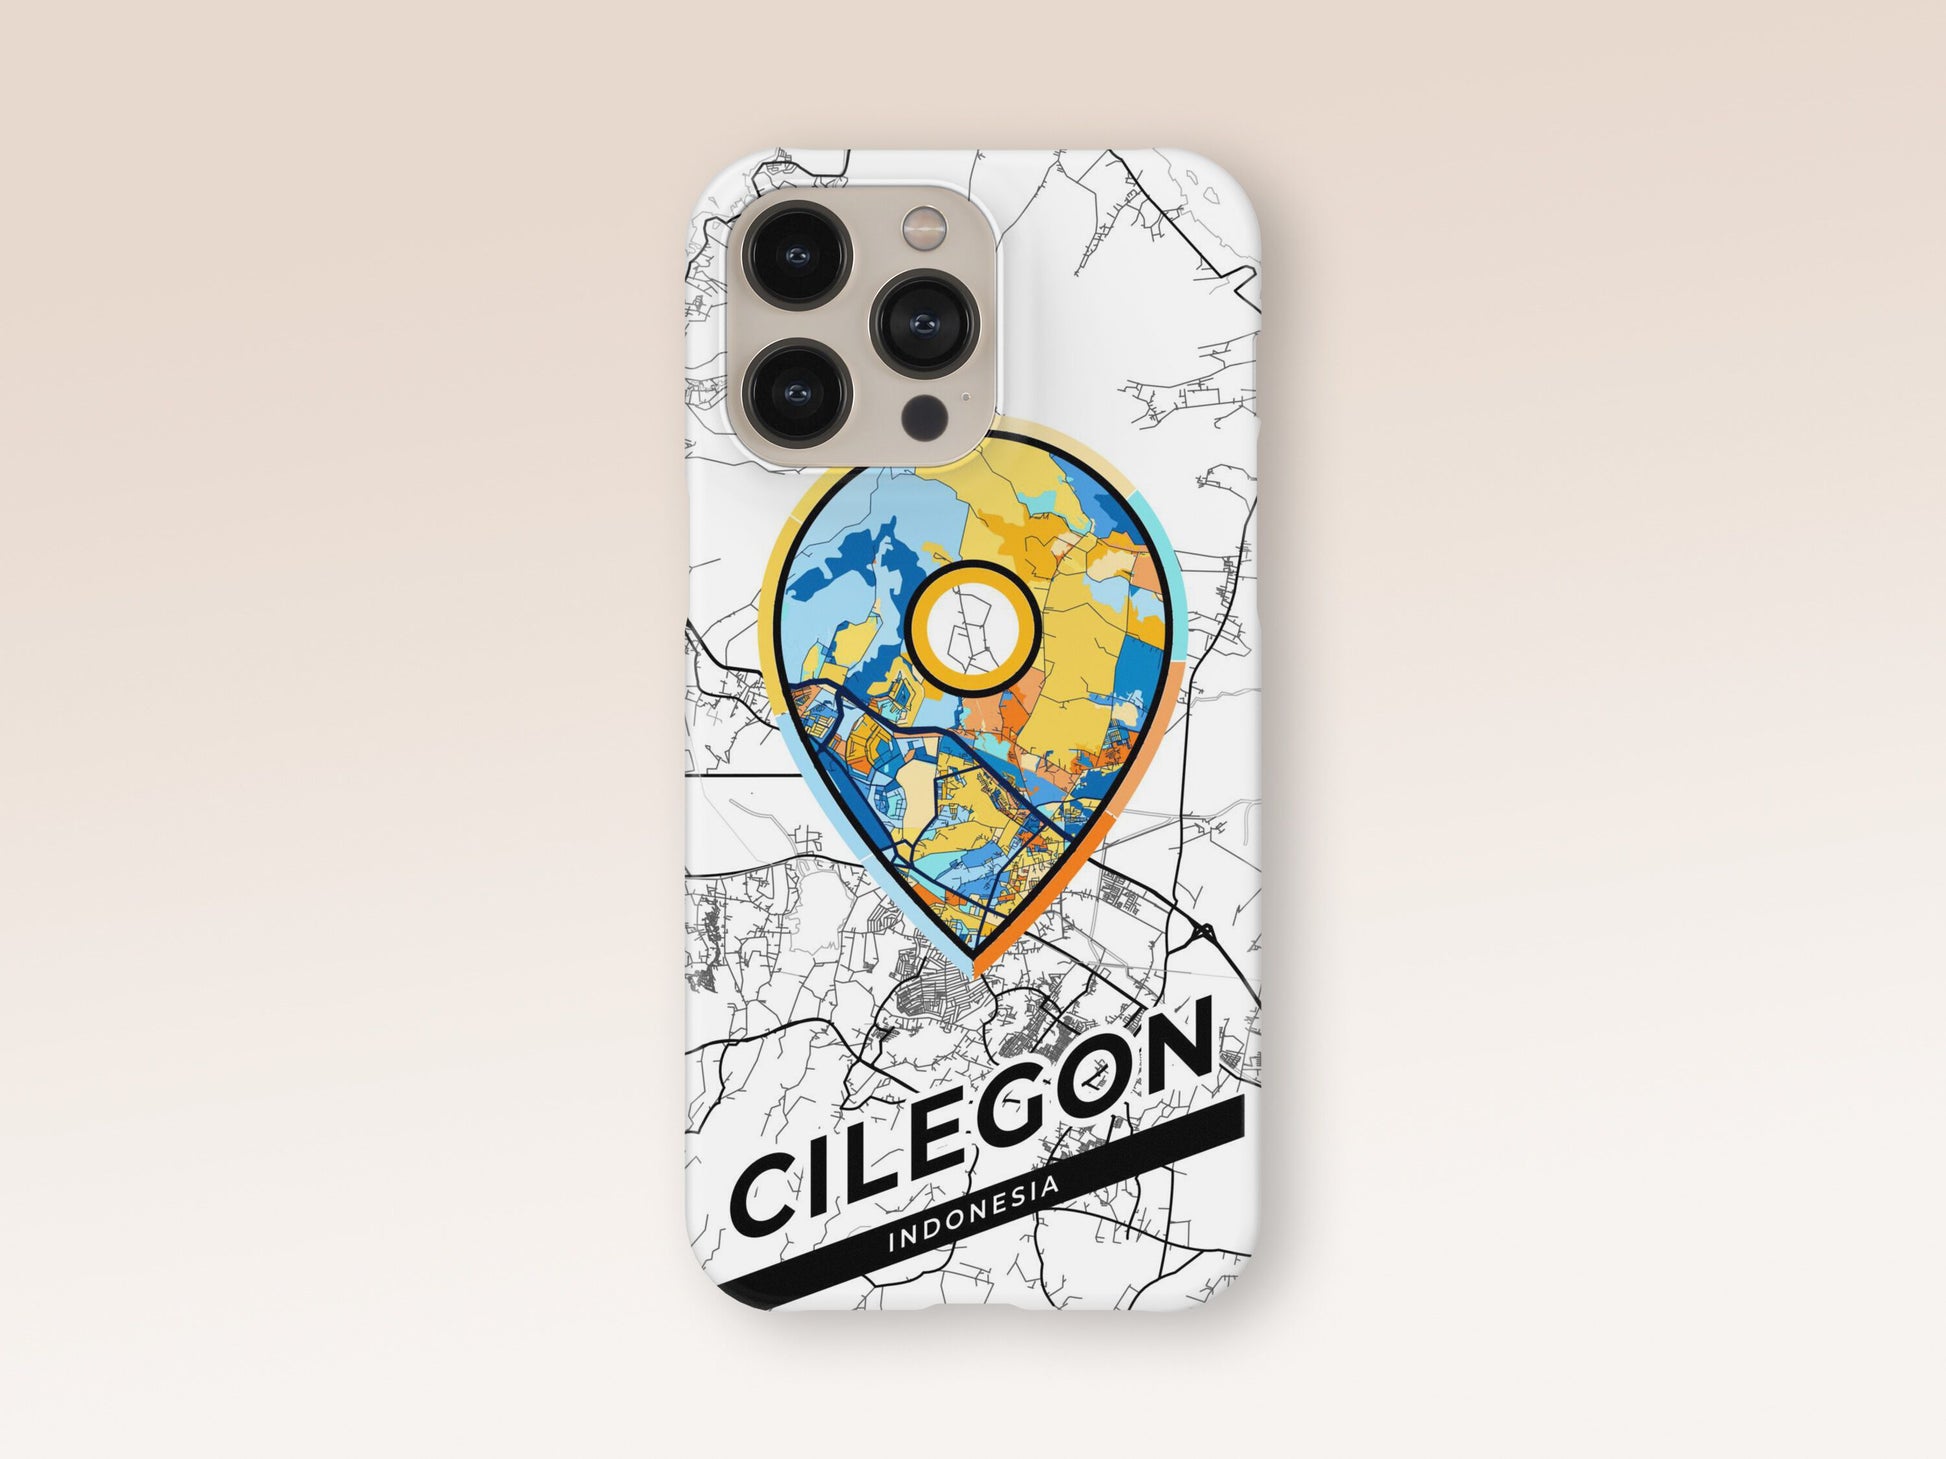 Cilegon Indonesia slim phone case with colorful icon. Birthday, wedding or housewarming gift. Couple match cases. 1